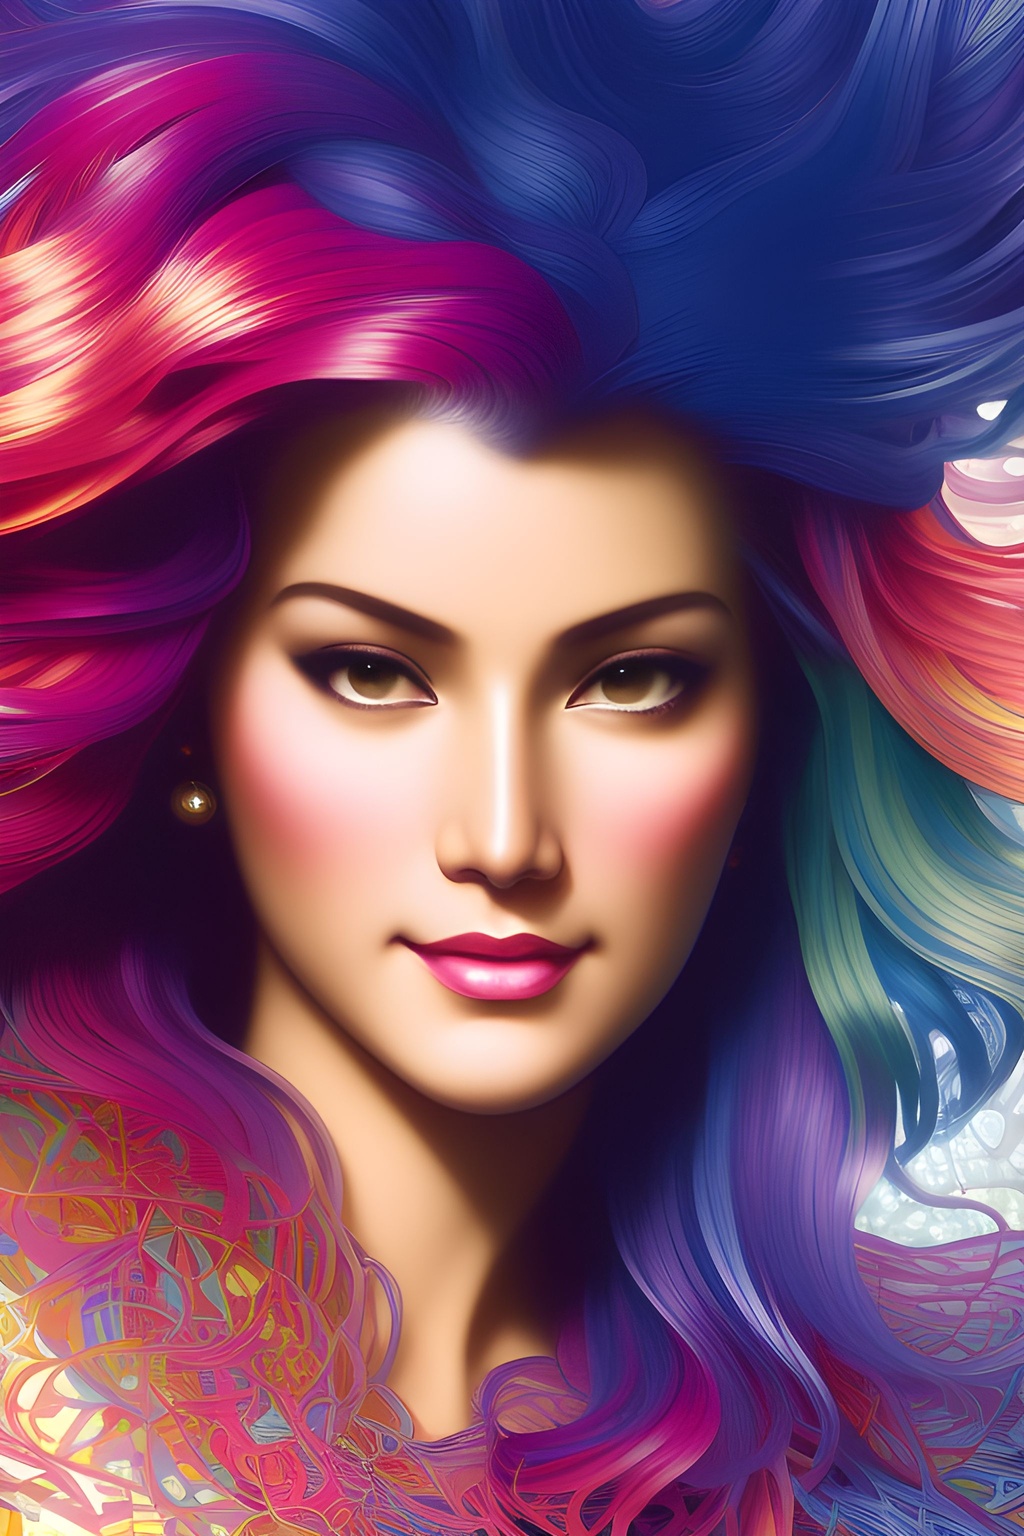 Prompt: abstract_design_muted_colors__highly_detailed__cartoon_style_random_hair_styles__attractive_woman_sm_Seed-4713612_Steps-25_Guidance-12.1